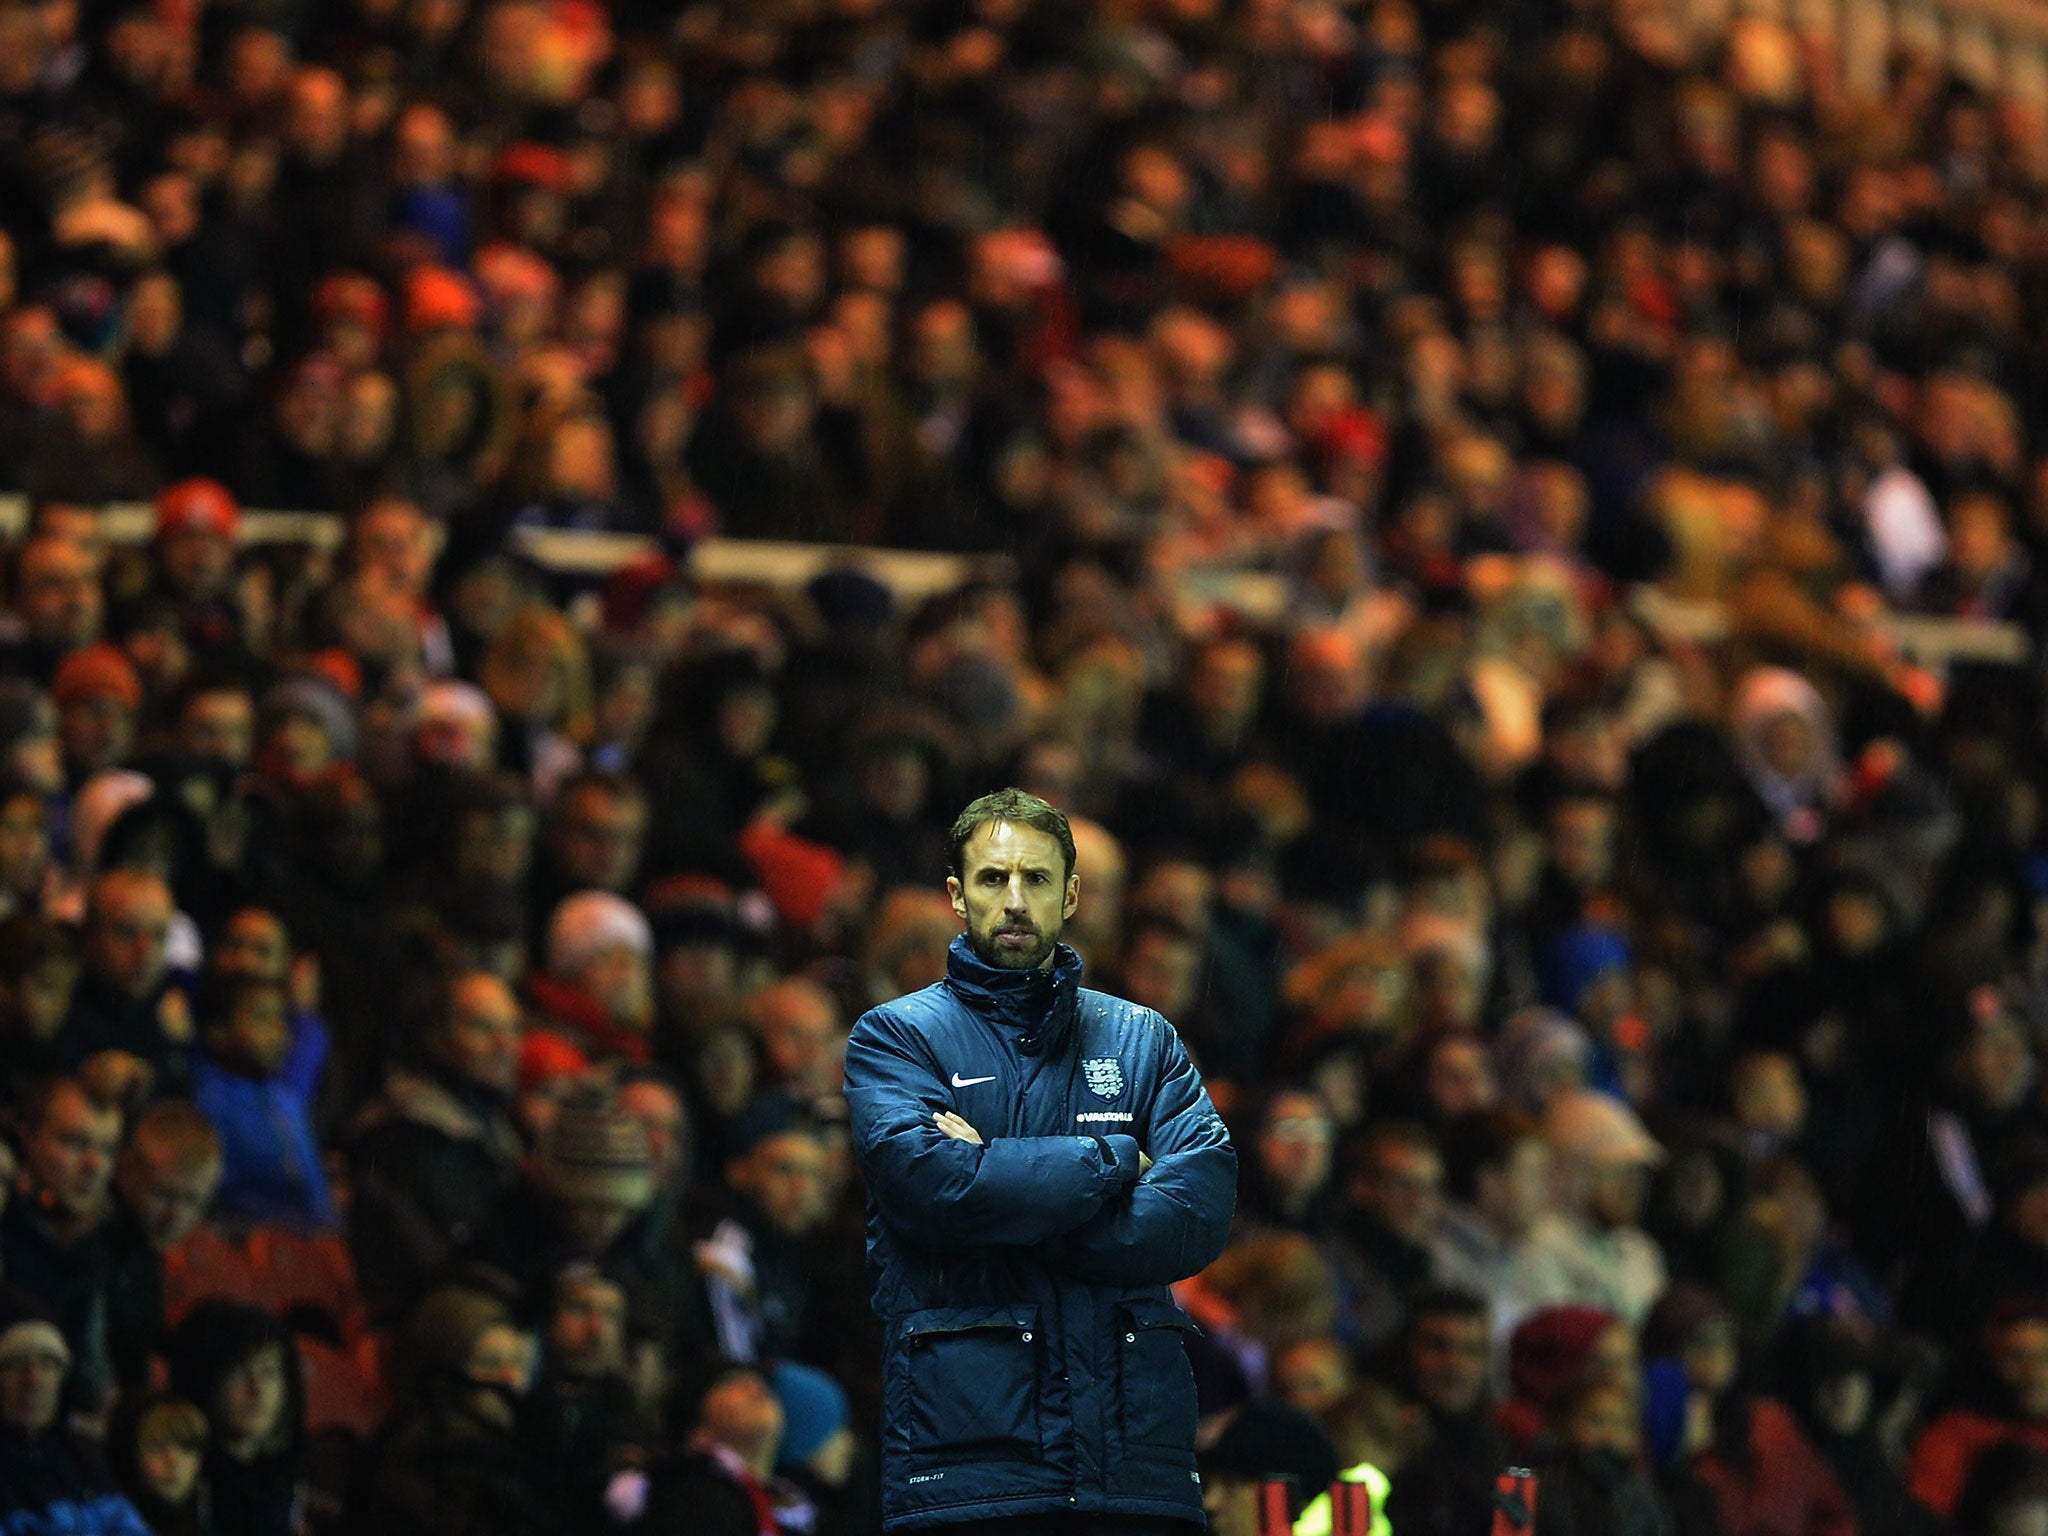 Southgate looks on from the sidelines during England U21's international friendly against Germany U21s last year